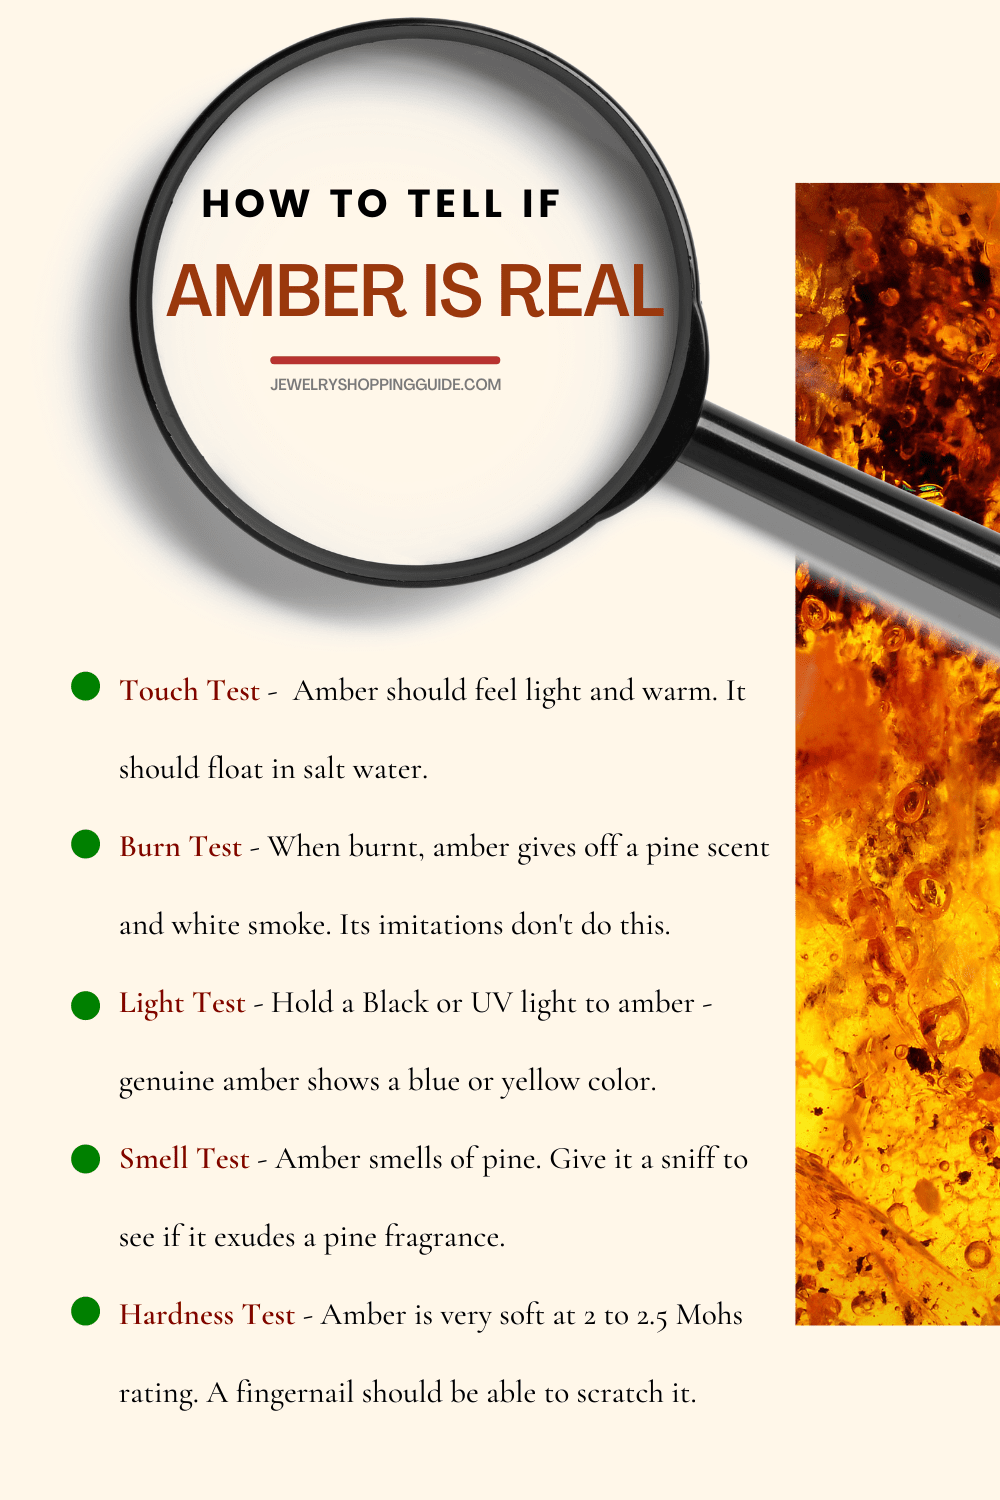 How to tell if amber is real